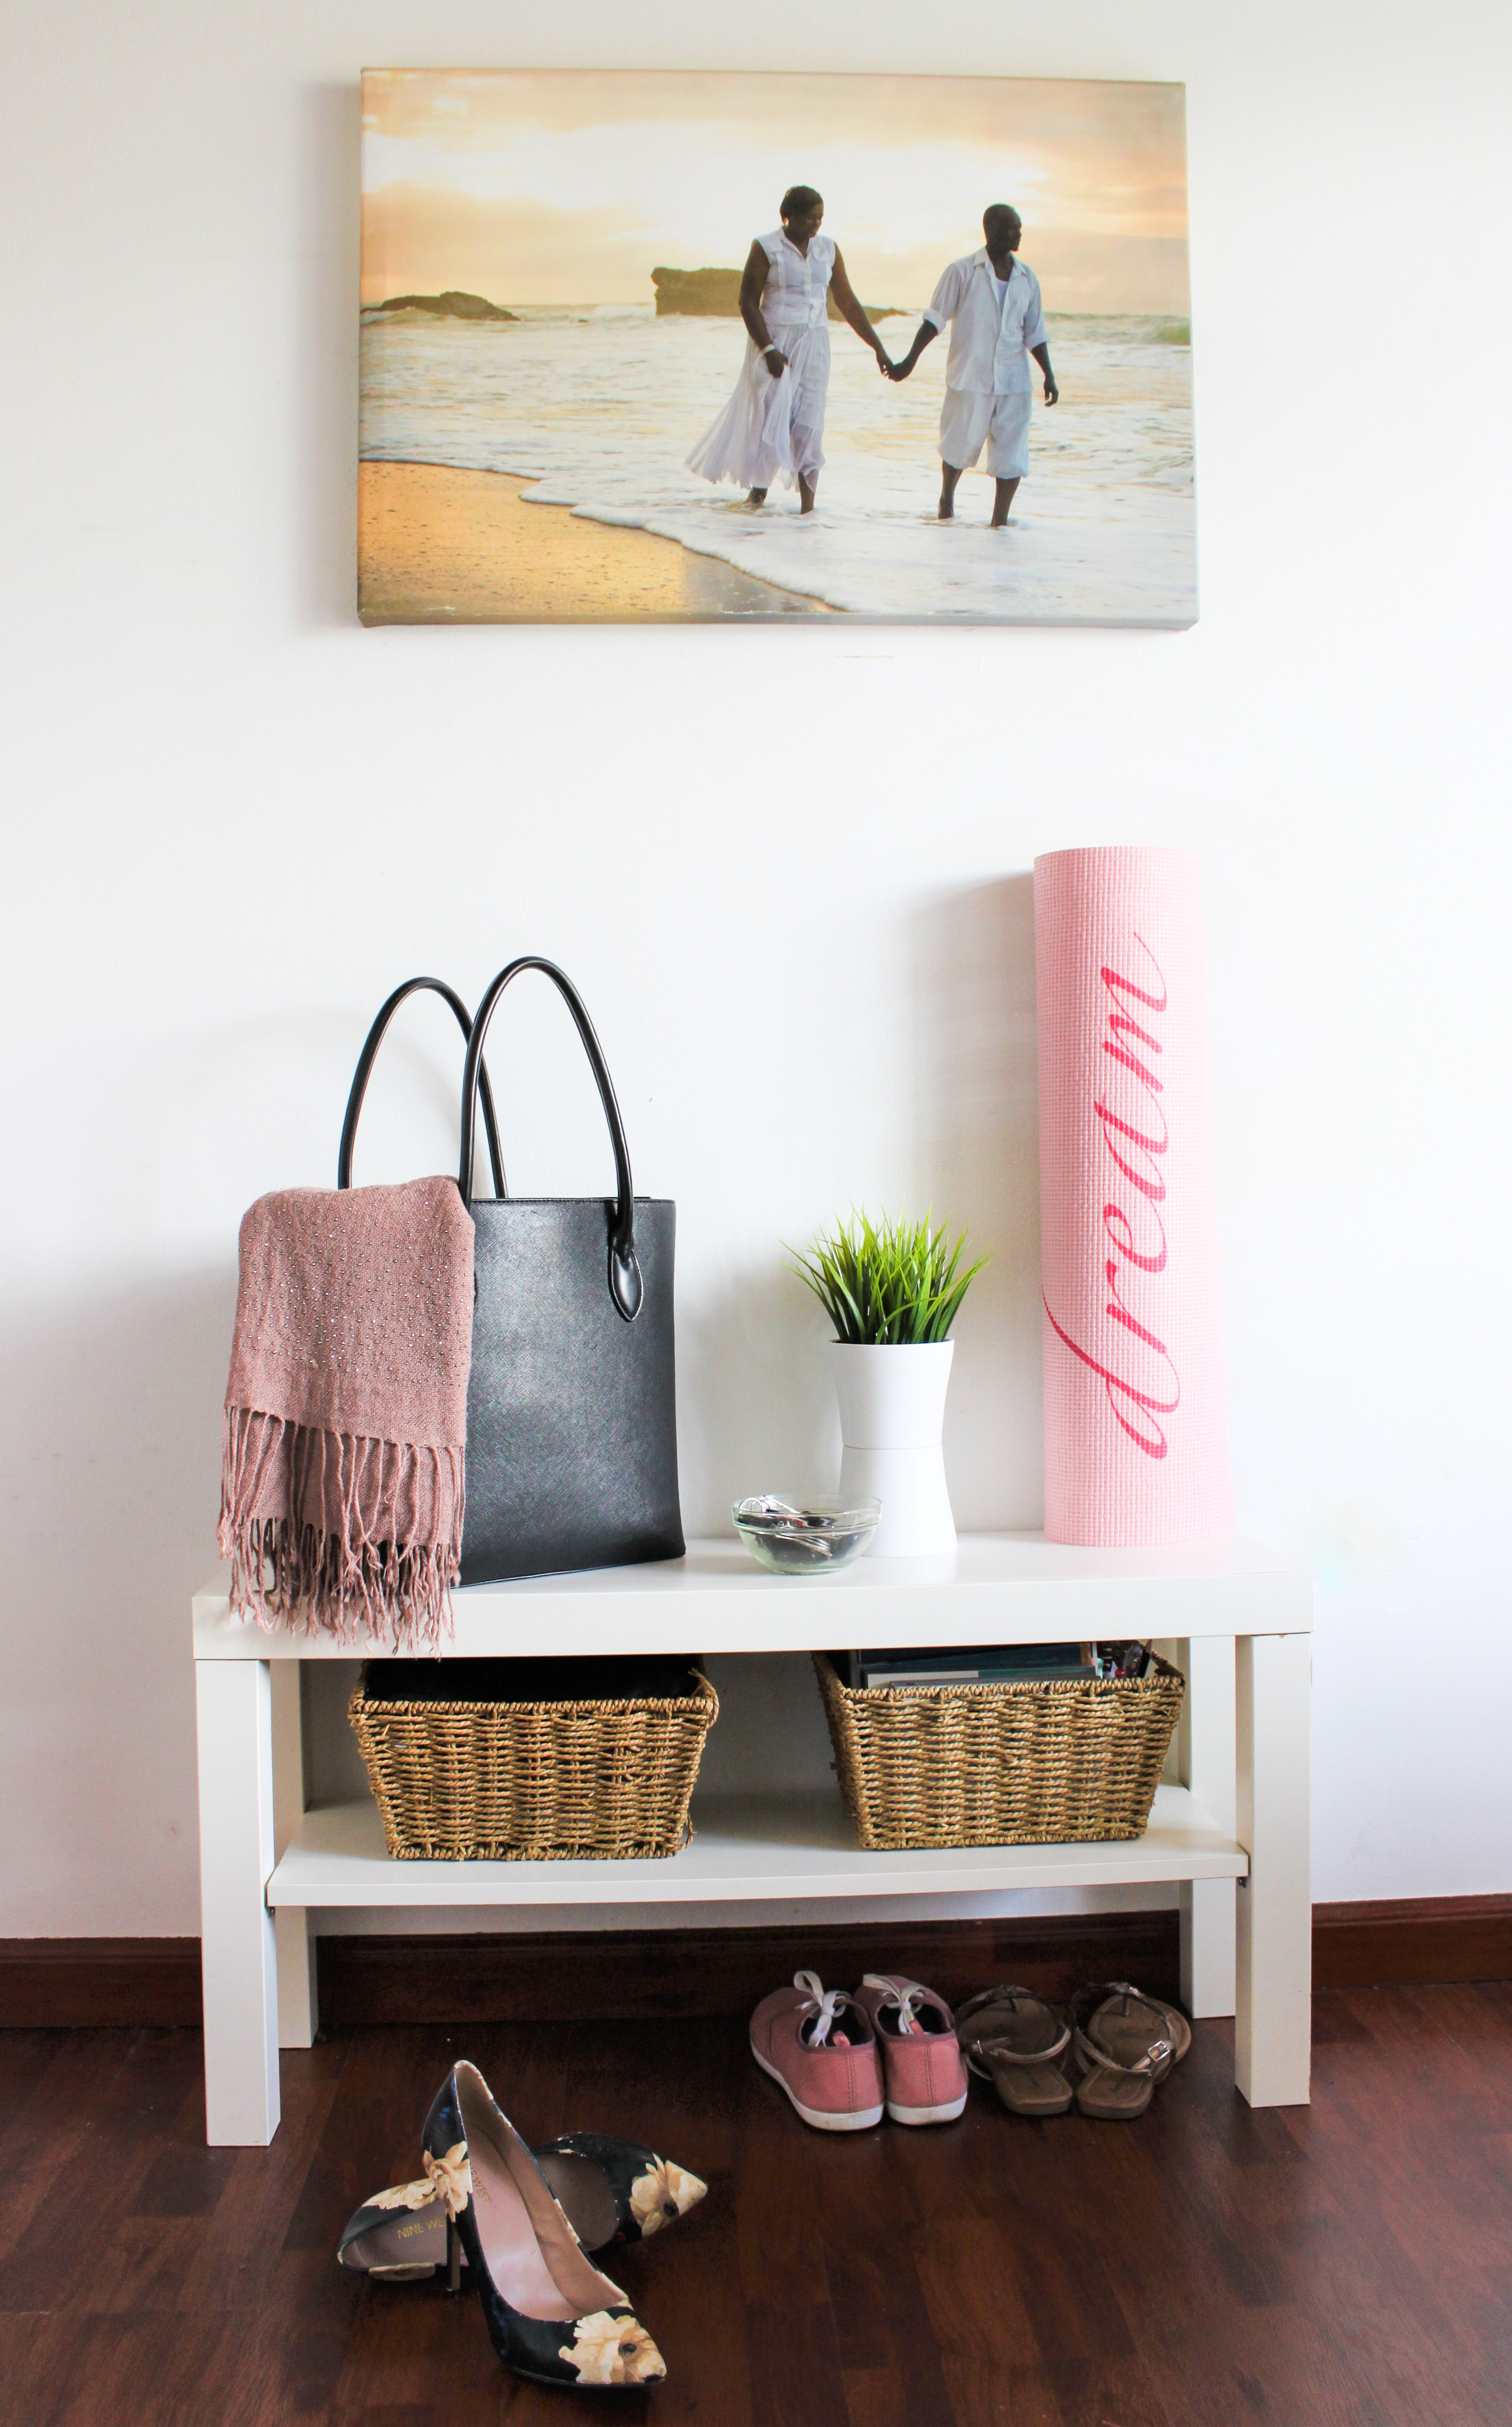 Ikea LACK TV bench perfect for a small entryway (6 ways to use the Ikea LACK TV Bench)